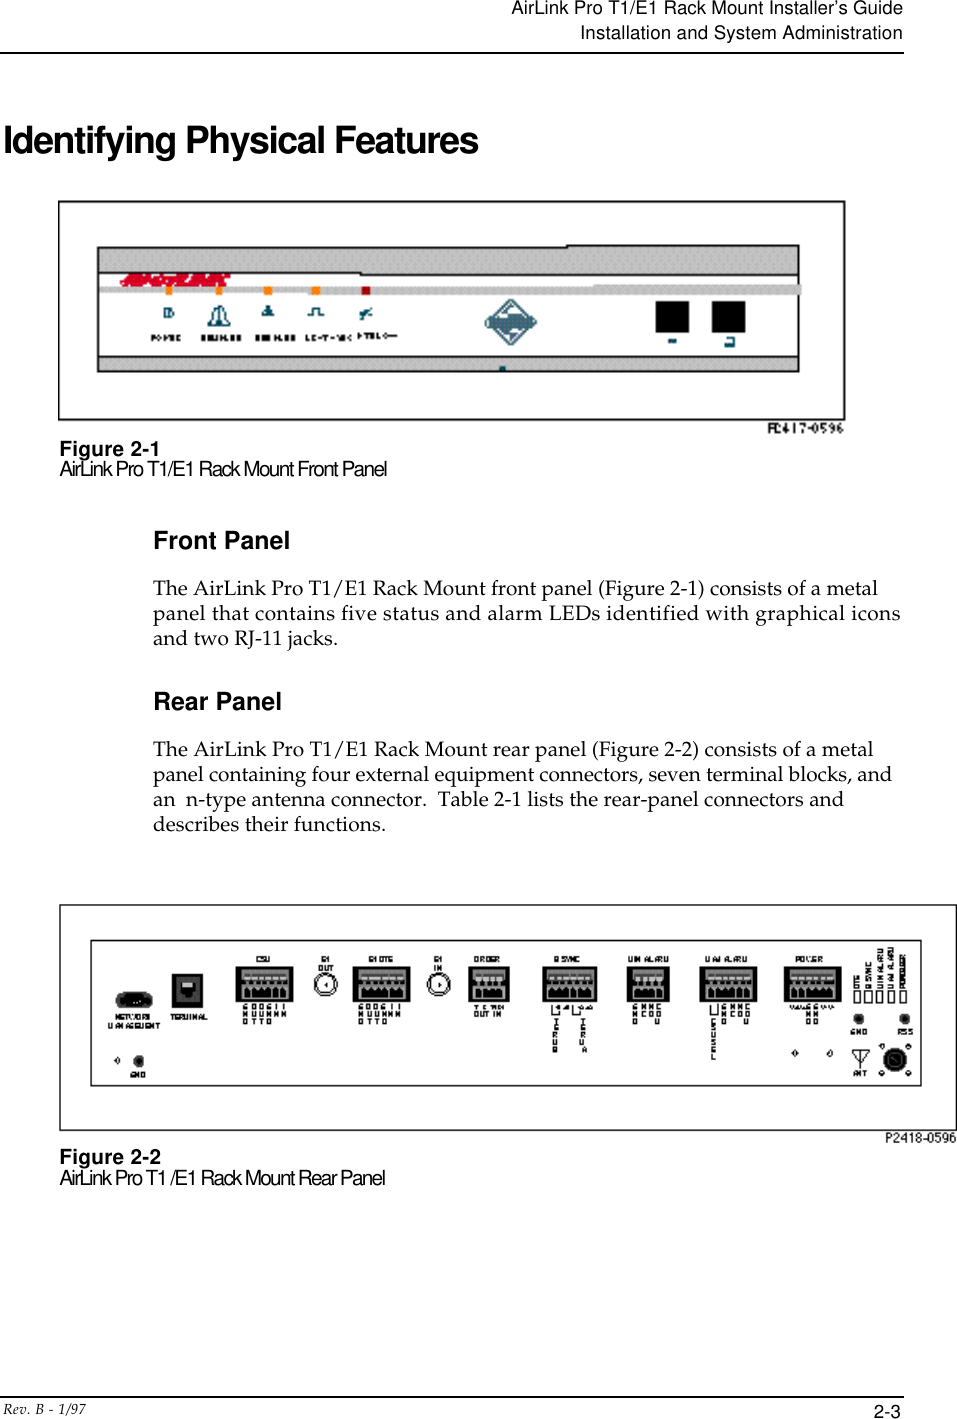 AirLink Pro T1/E1 Rack Mount Installer’s GuideInstallation and System AdministrationRev. B - 1/97 2-3Identifying Physical FeaturesFigure 2-1AirLink Pro T1/E1 Rack Mount Front PanelFront PanelThe AirLink Pro T1/E1 Rack Mount front panel (Figure 2-1) consists of a metalpanel that contains five status and alarm LEDs identified with graphical iconsand two RJ-11 jacks.Rear PanelThe AirLink Pro T1/E1 Rack Mount rear panel (Figure 2-2) consists of a metalpanel containing four external equipment connectors, seven terminal blocks, andan  n-type antenna connector.  Table 2-1 lists the rear-panel connectors anddescribes their functions.Figure 2-2AirLink Pro T1 /E1 Rack Mount Rear Panel